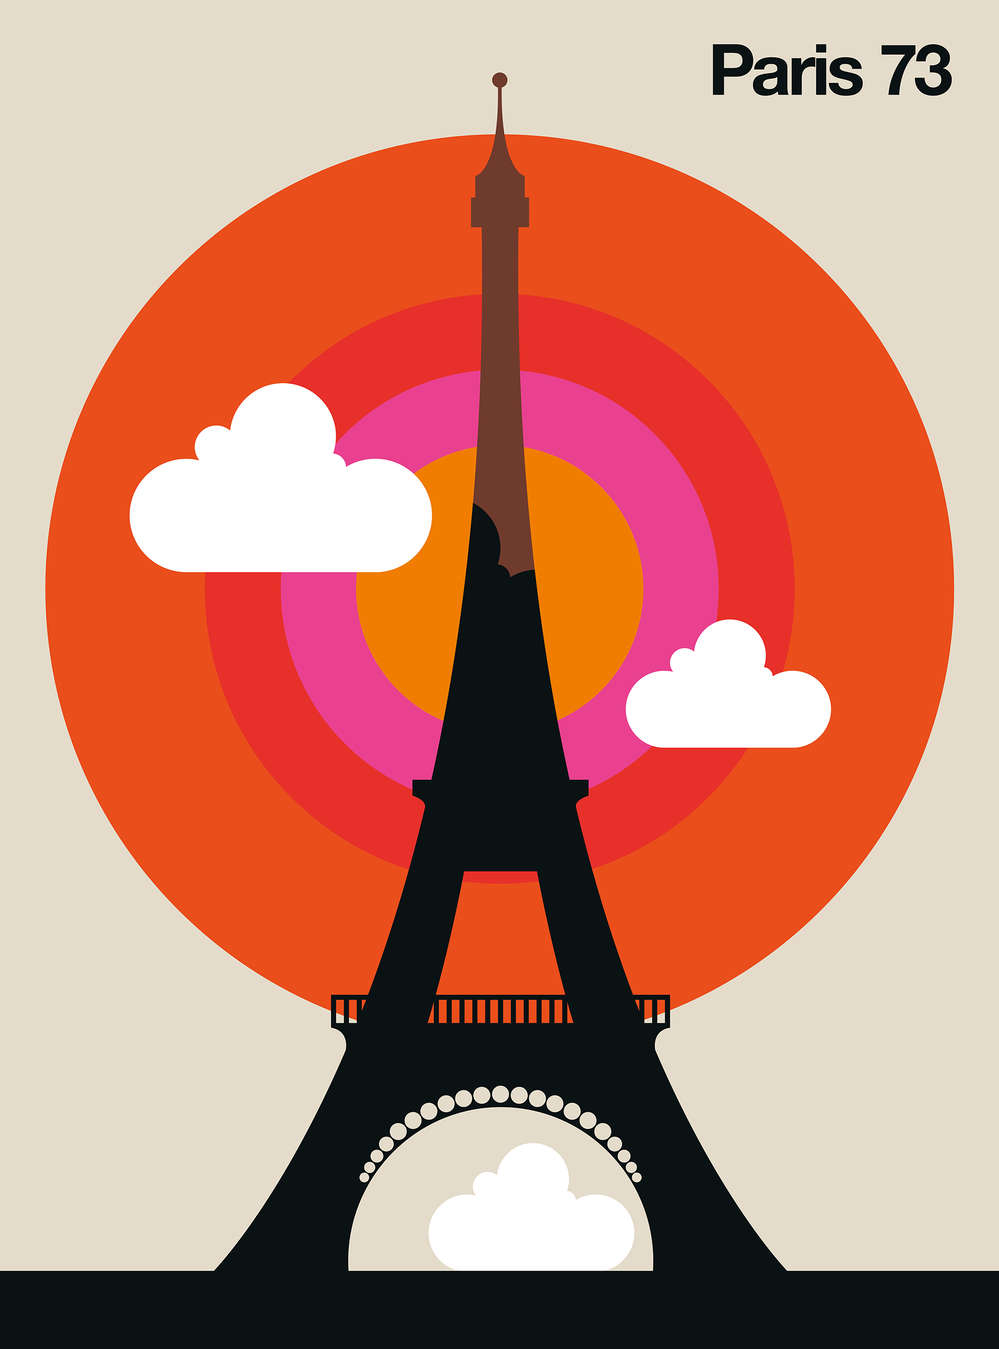             Photo wallpaper Paris with Eiffel Tower motif in retro style
        